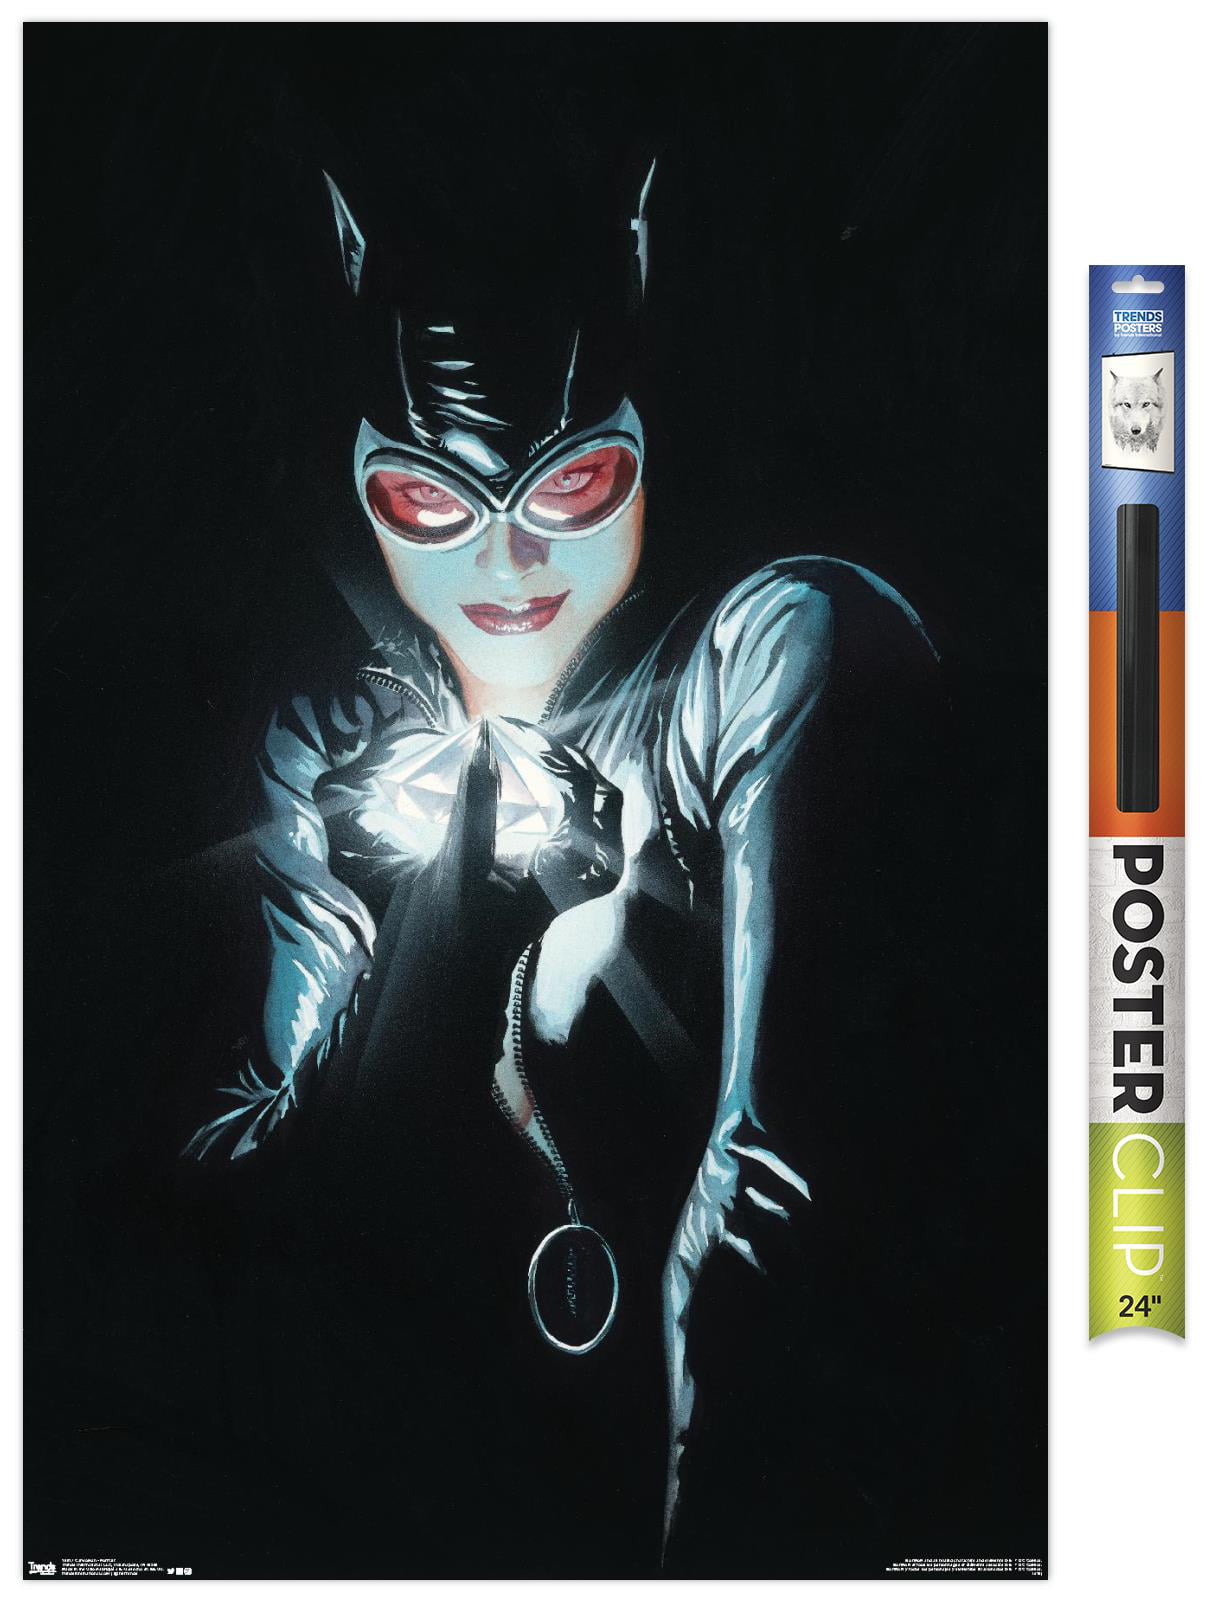 CATWOMEN 6 x 4.3 inches PRIVATE PRINTING PICTURE 